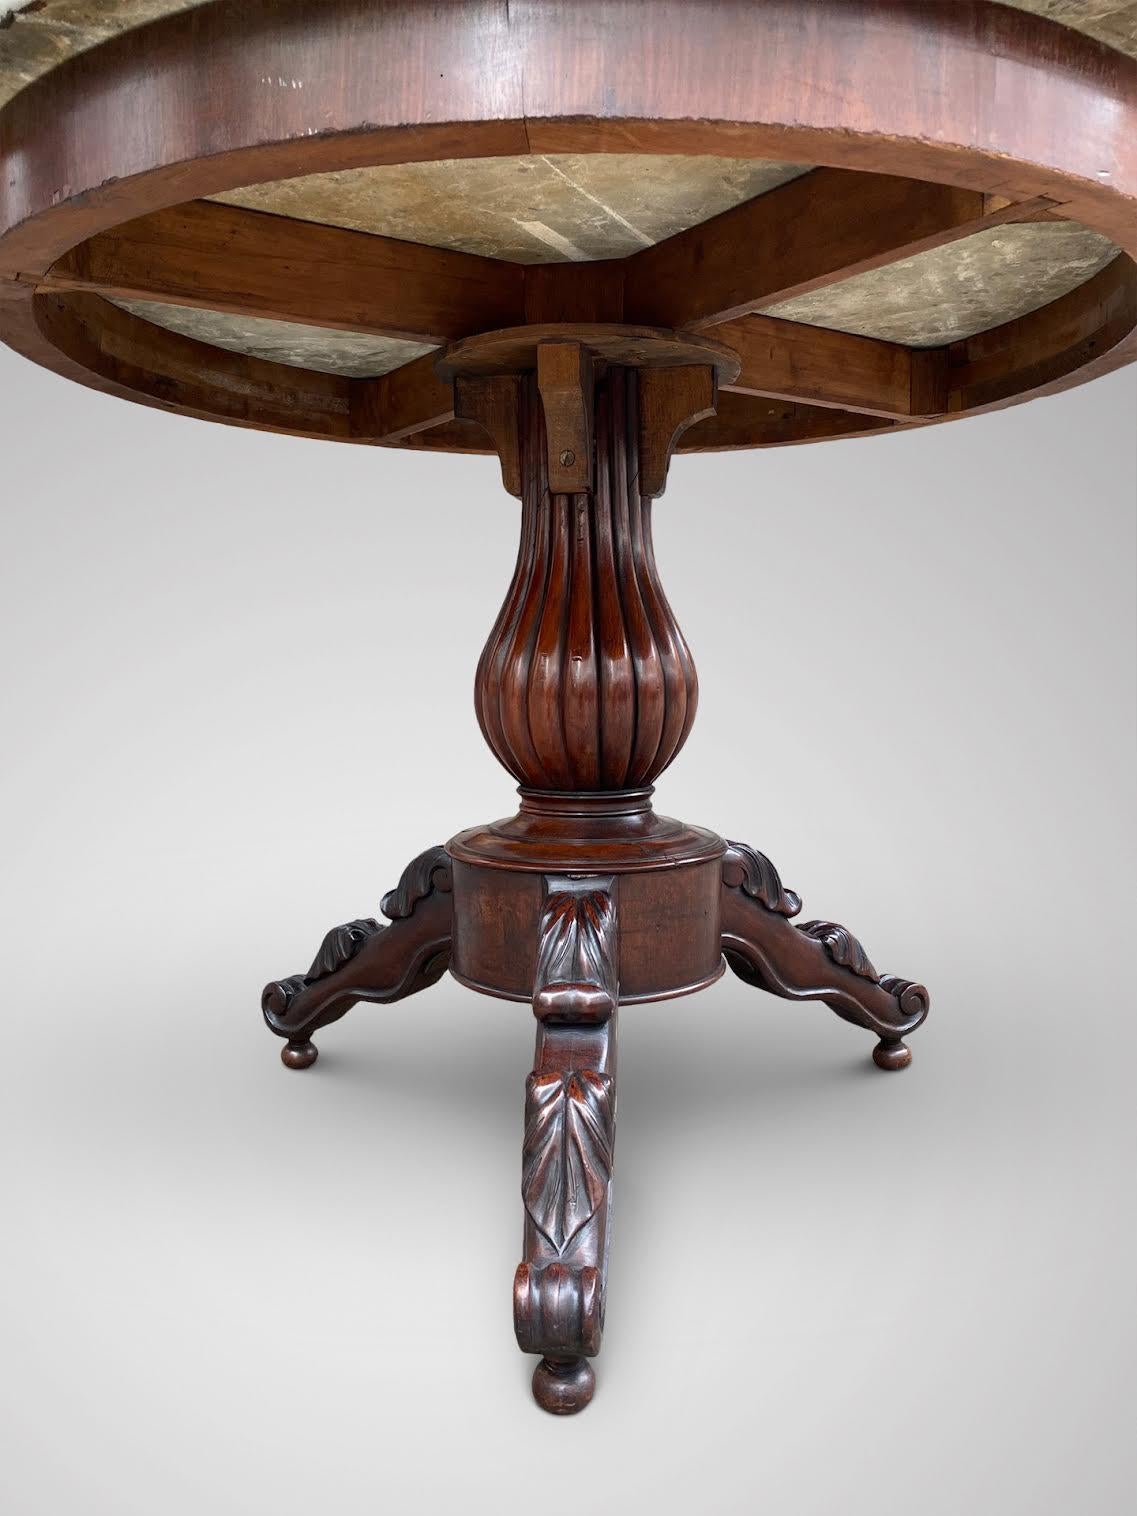 Polished 19th Century French Mahogany and Marble Top Gueridon Table